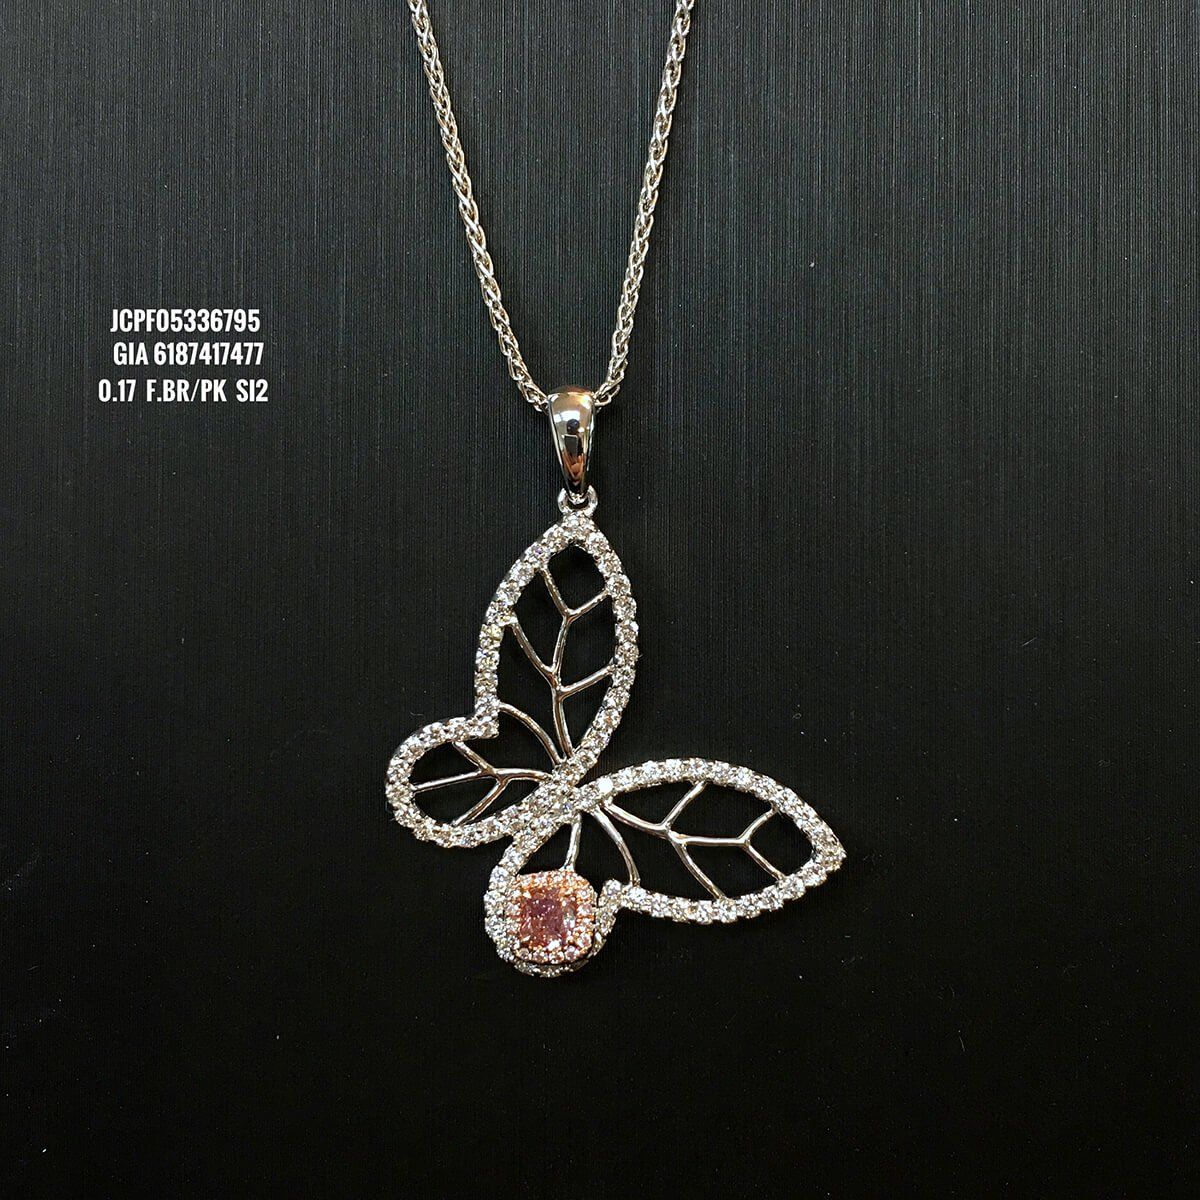 Fancy Brownish Pink Diamond Necklace, 0.17 Ct. (1.03 Ct. TW), Cushion shape, GIA Certified, 6187417477